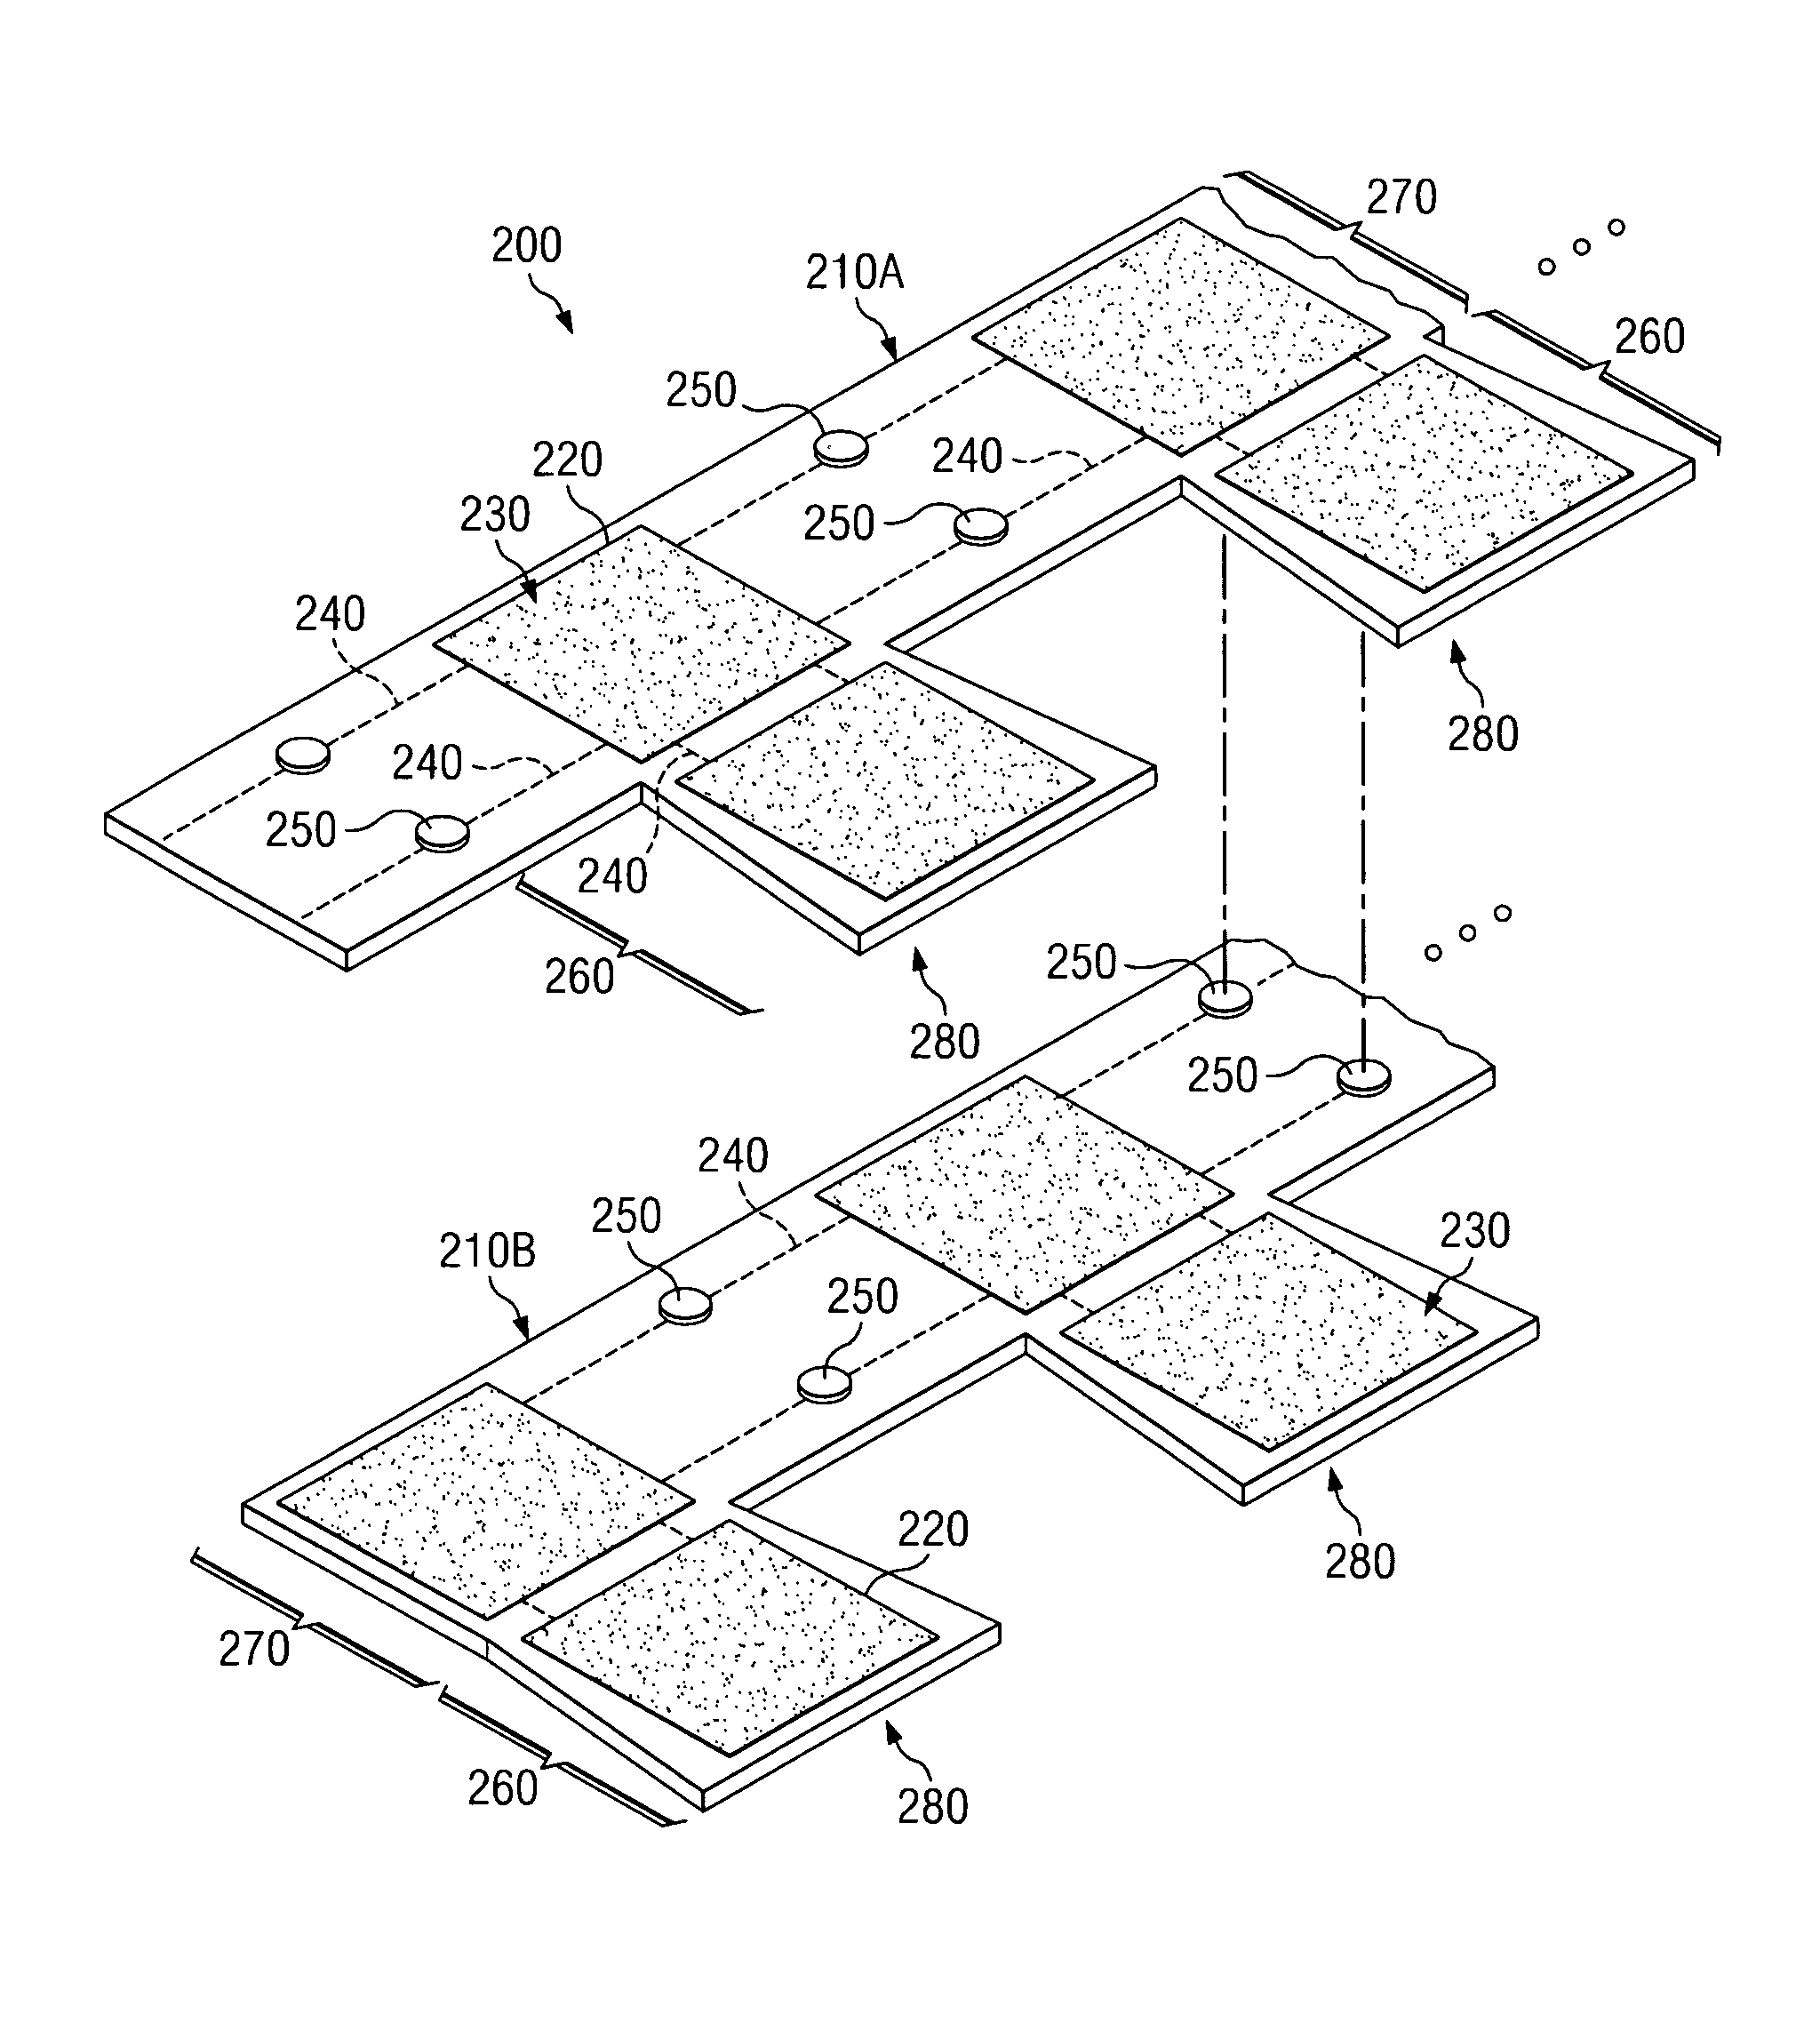 Rigid integrated photovoltaic roofing membrane and related methods of manufacturing same